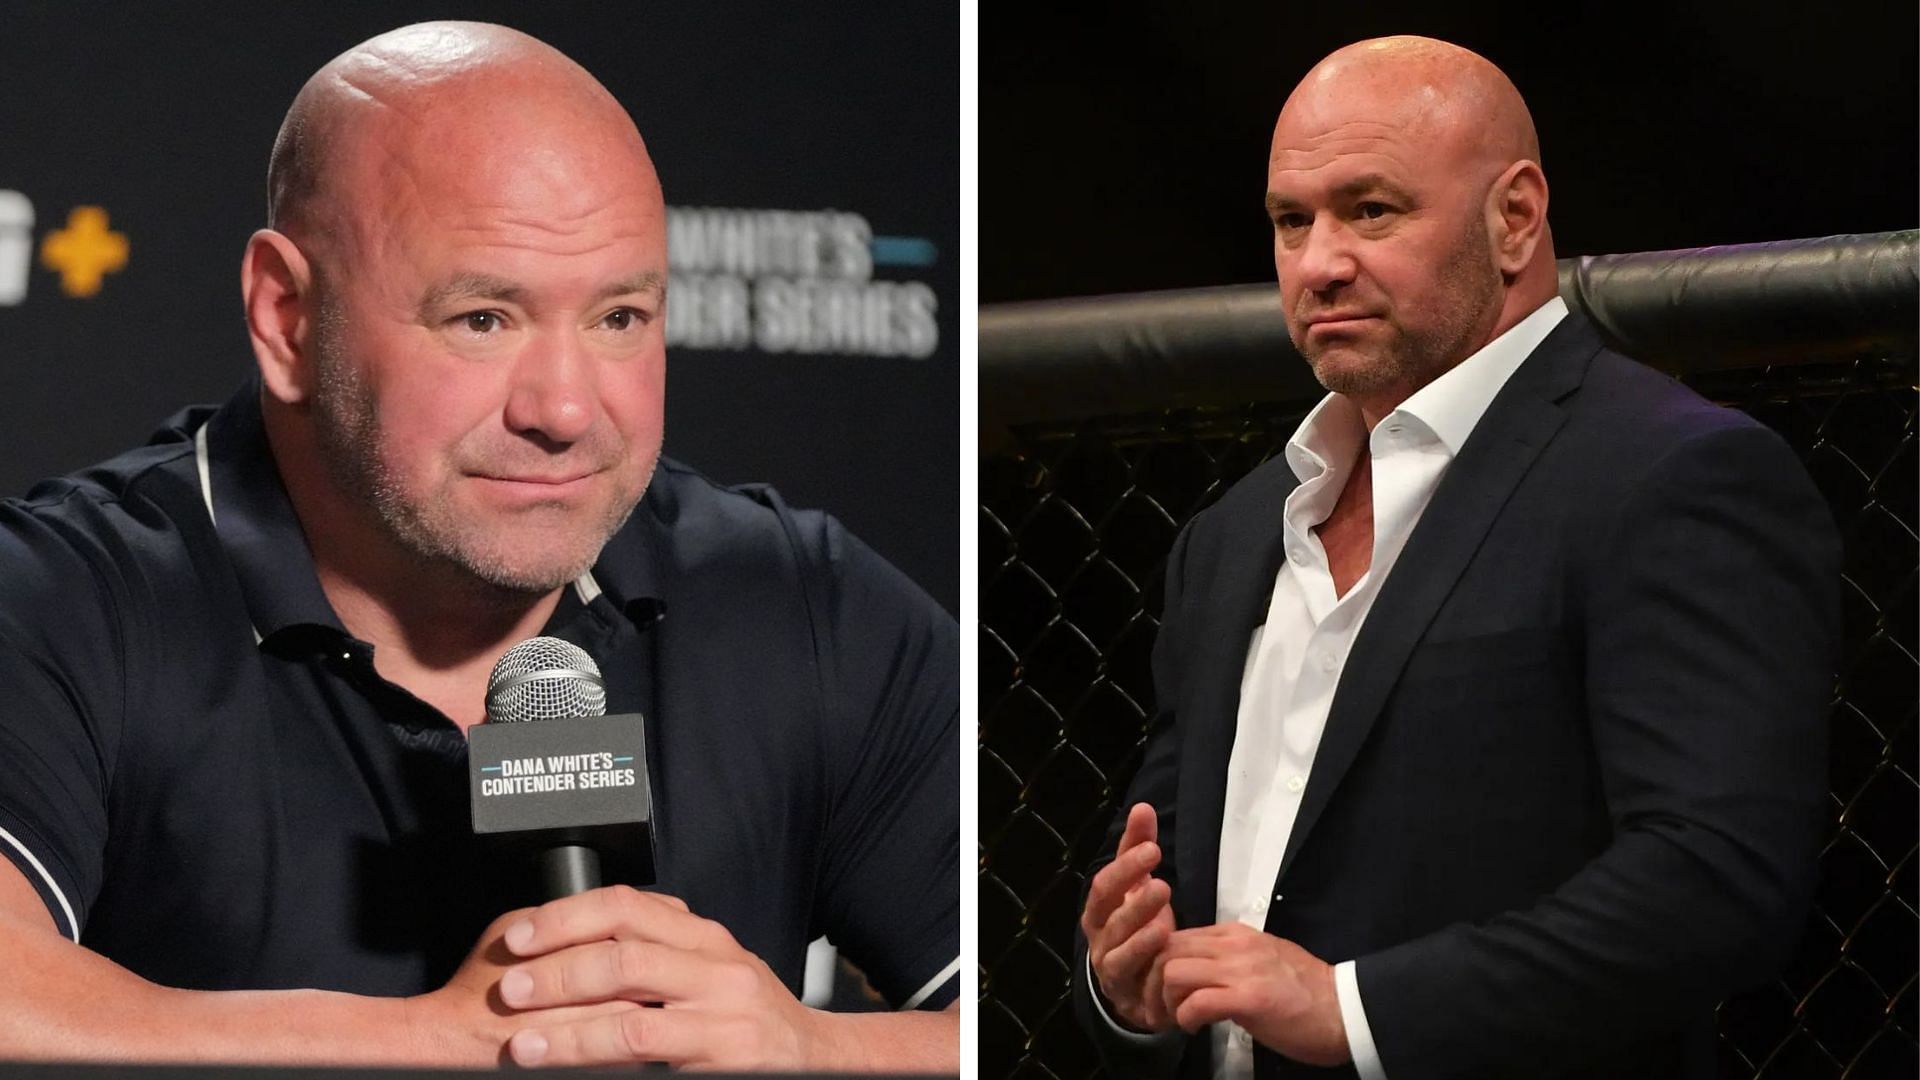 Dana White is the president of the Ultimate Fighting Championship